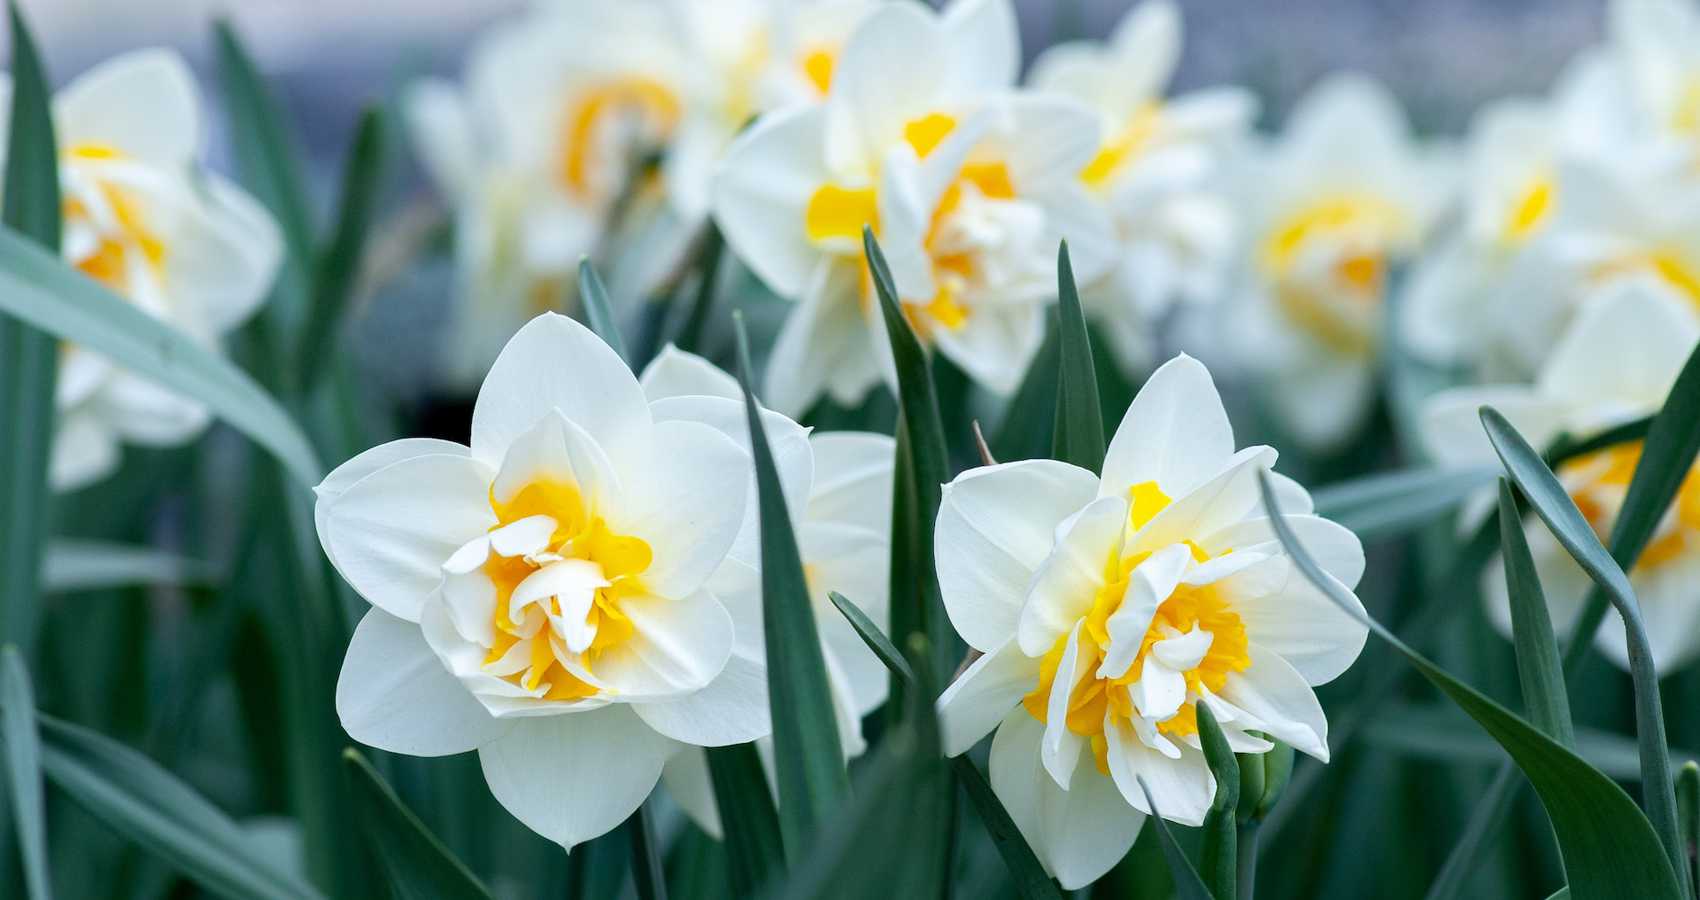 Daffodils, a short story by Julie Lindsell at Spillwords.com